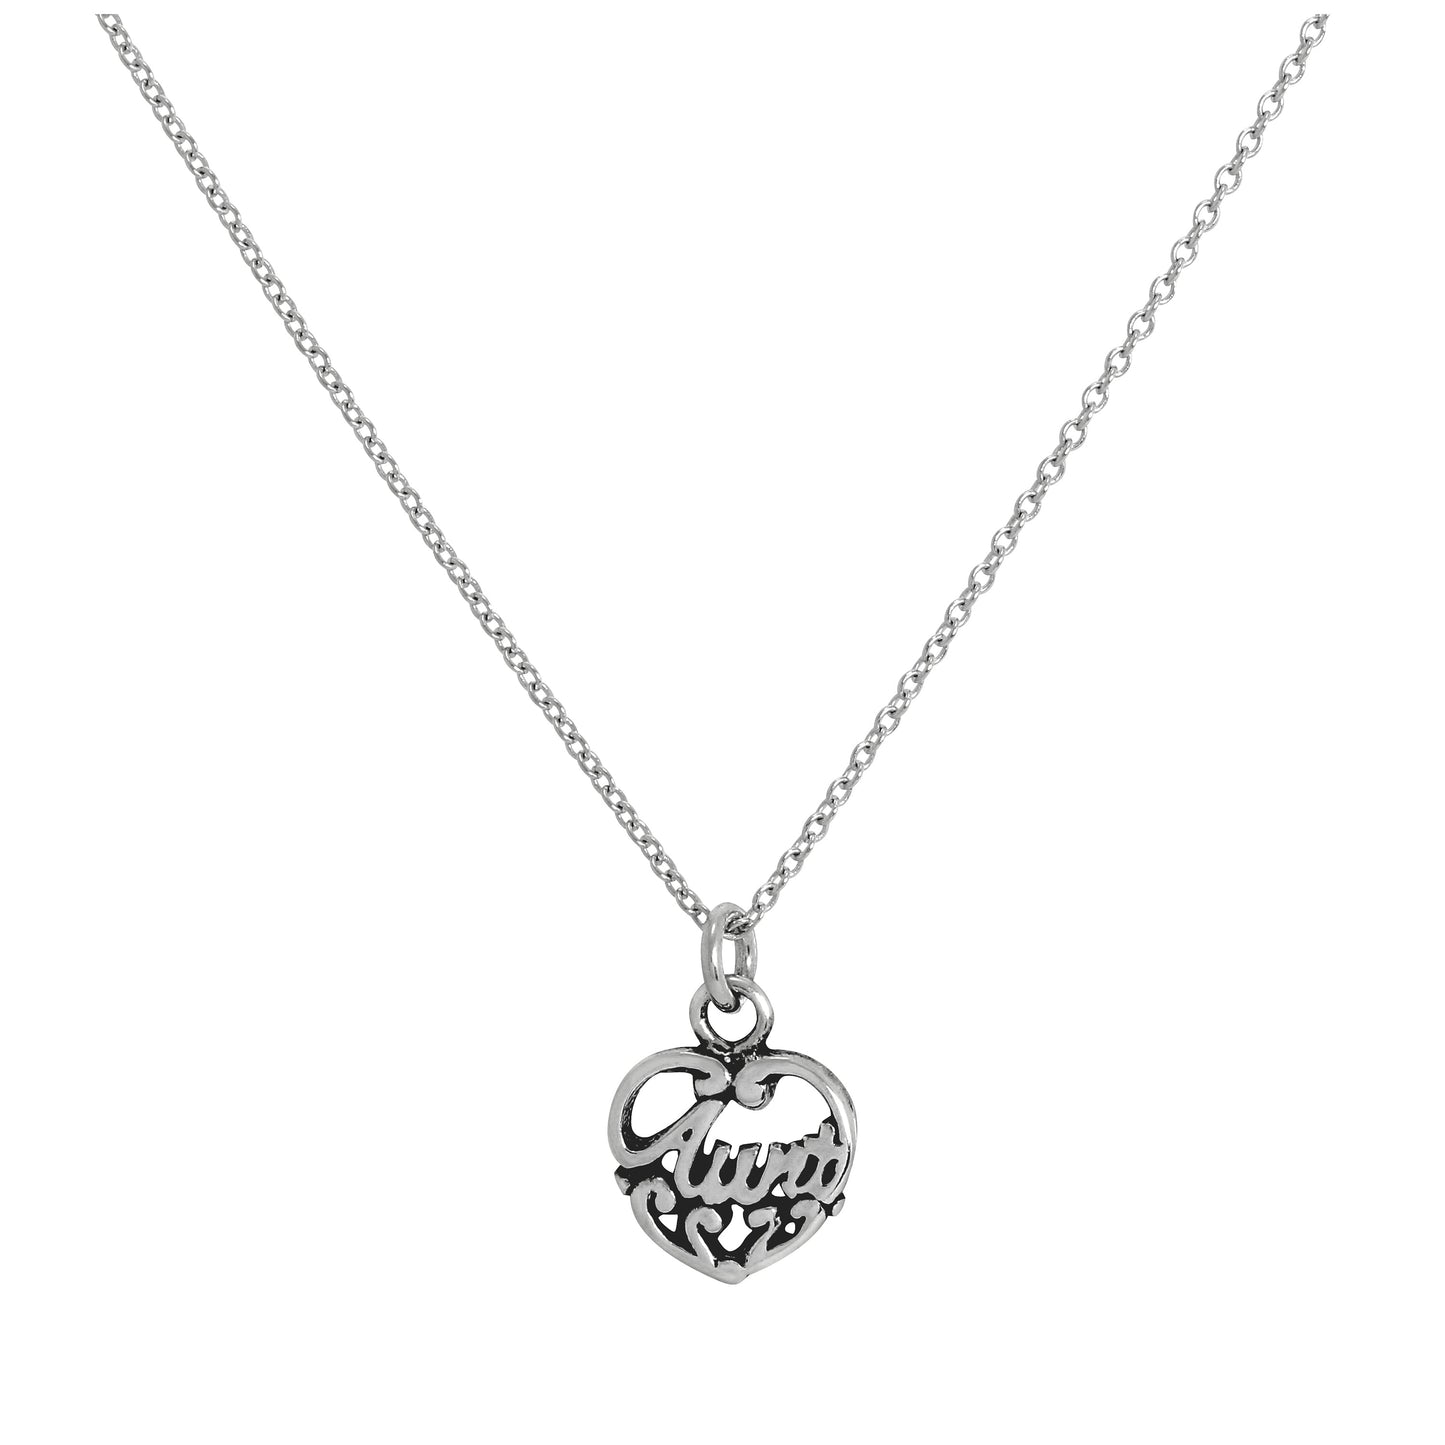 Sterling Silver Filigree Aunt Love Heart Pendant Necklace 16 - 32 Inches